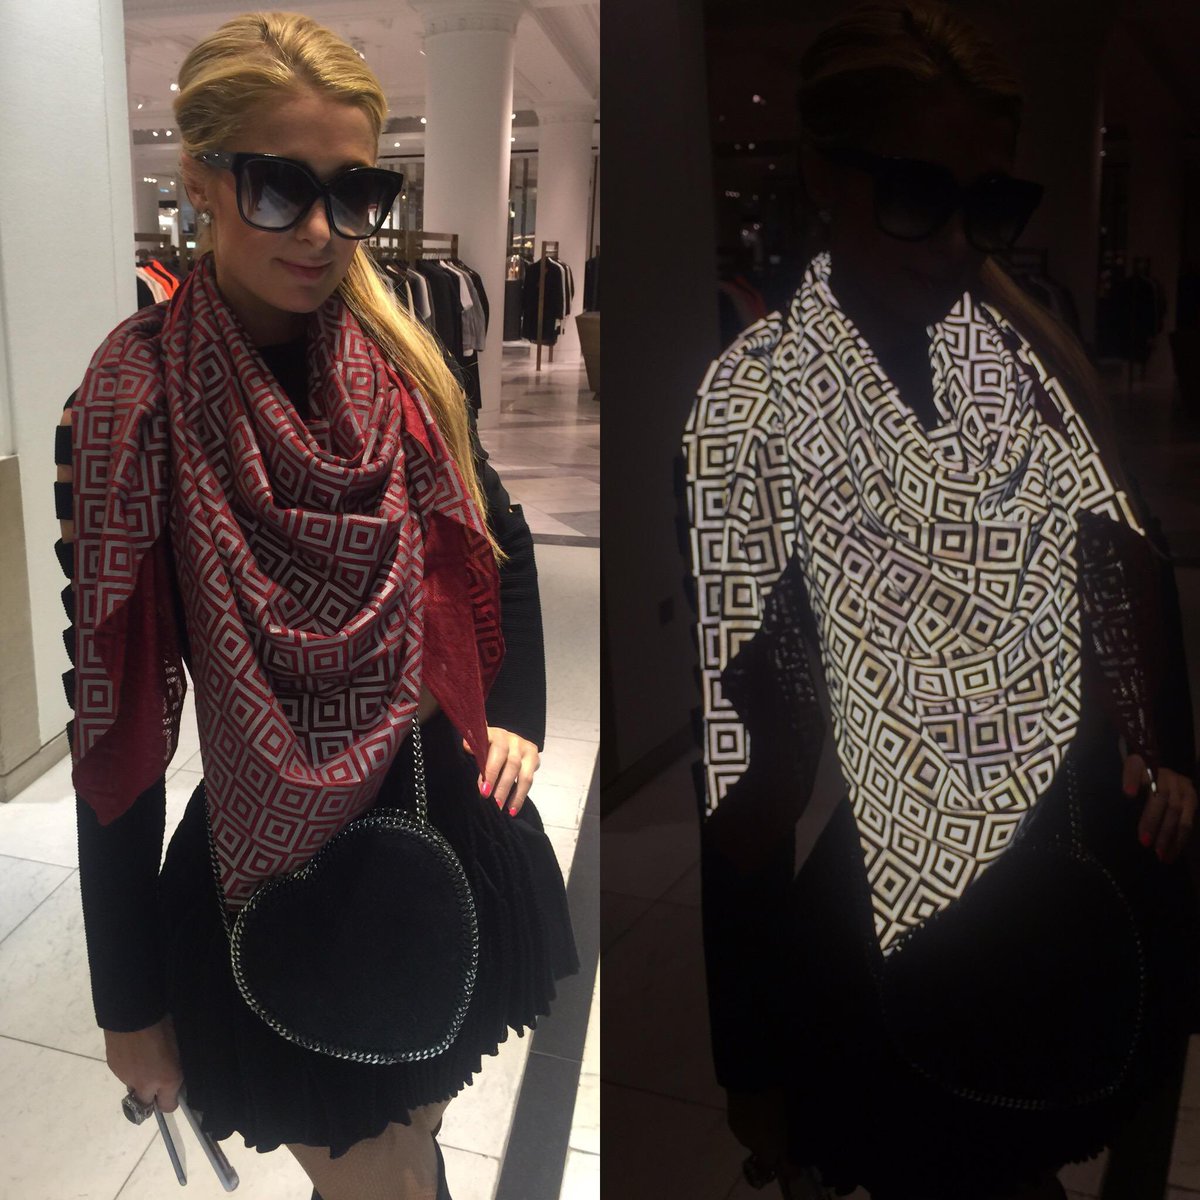 paris hilton wearing an anti-paparazzi scarf that obscures flash photography and ruin anyone’s picture